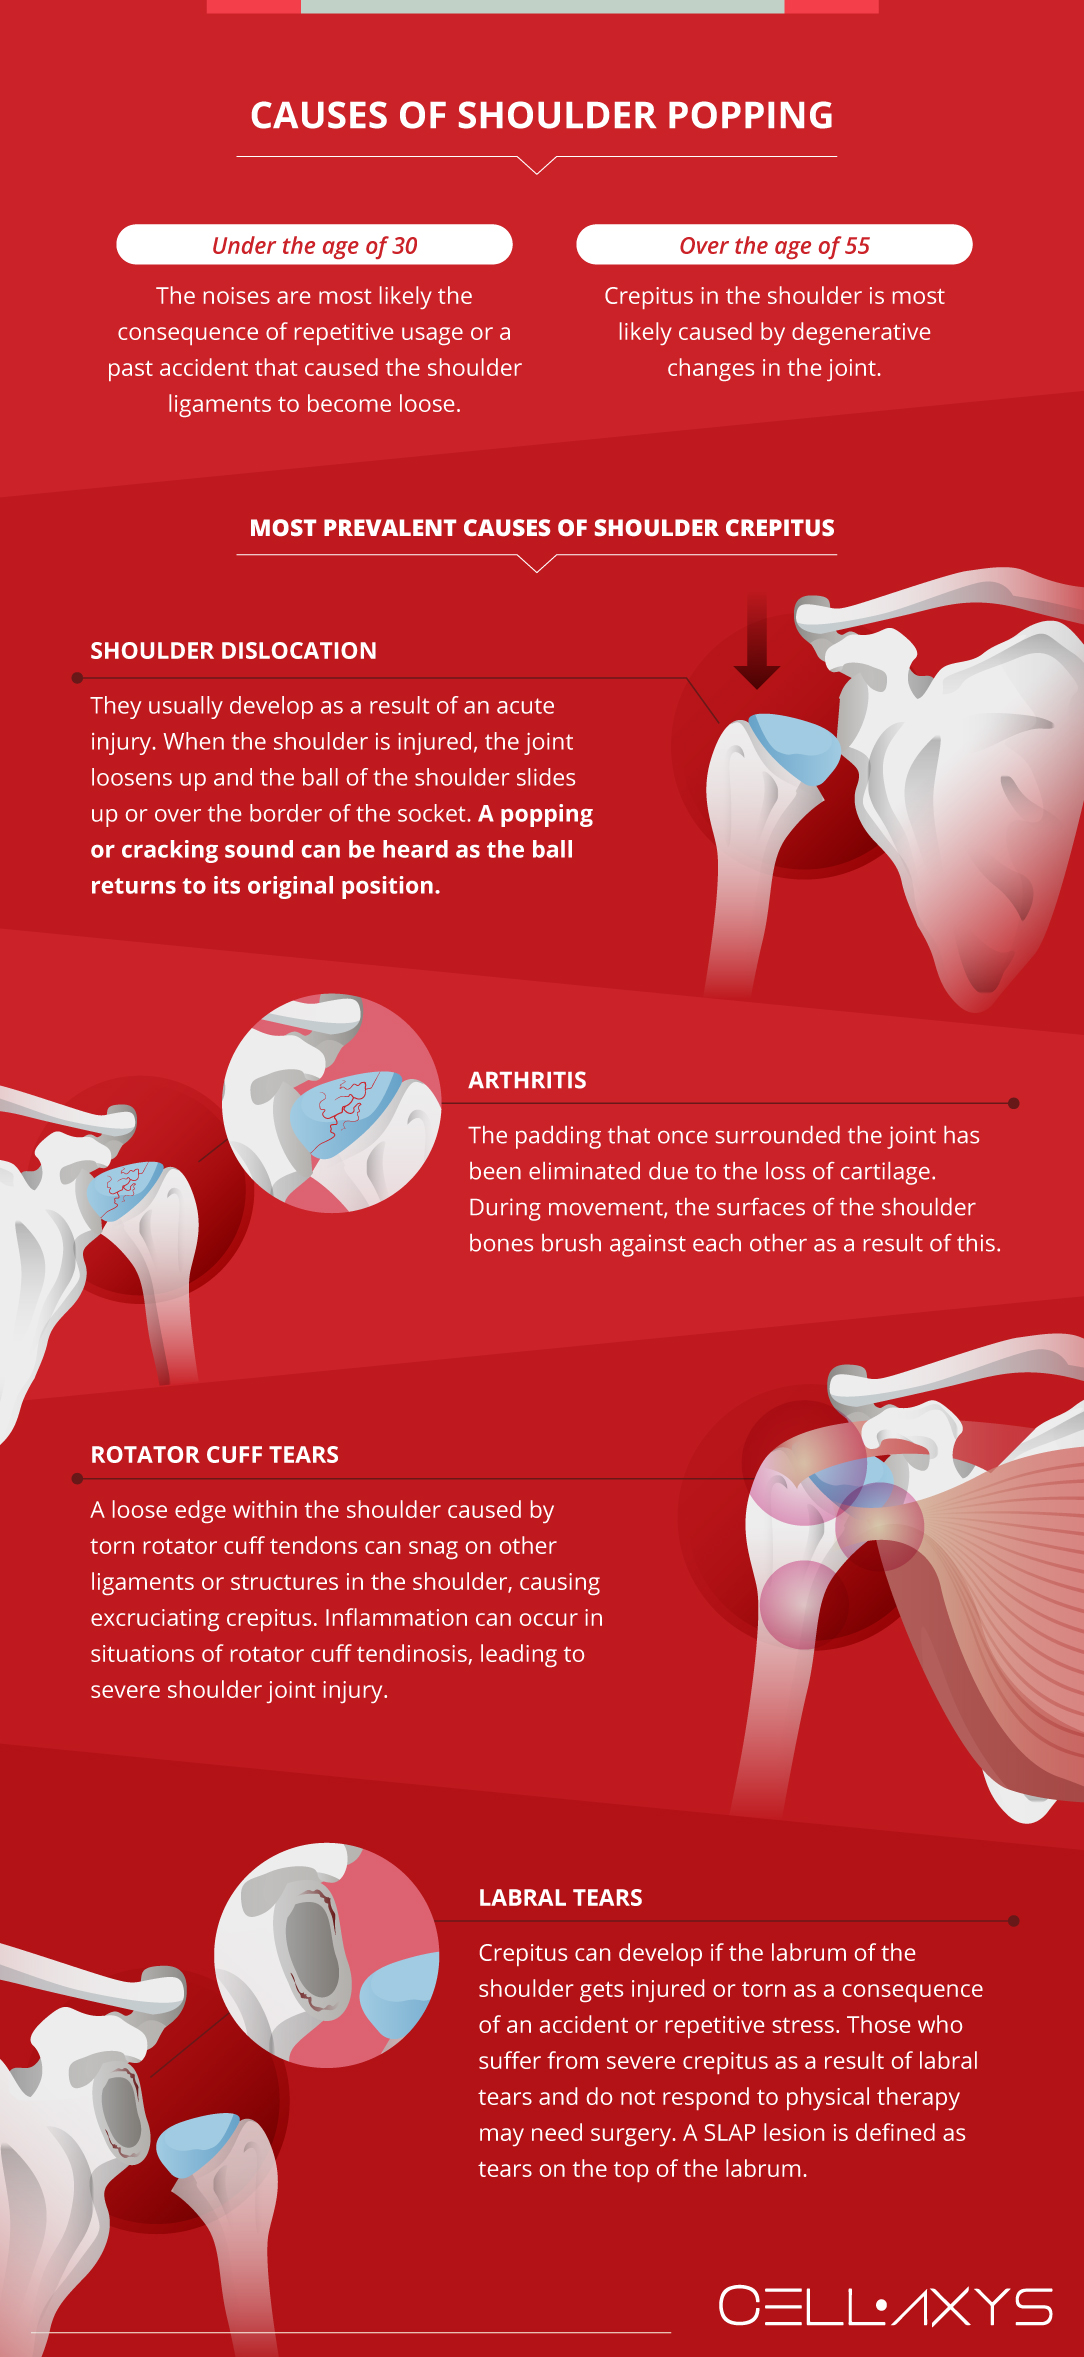 Causes of Shoulder Popping